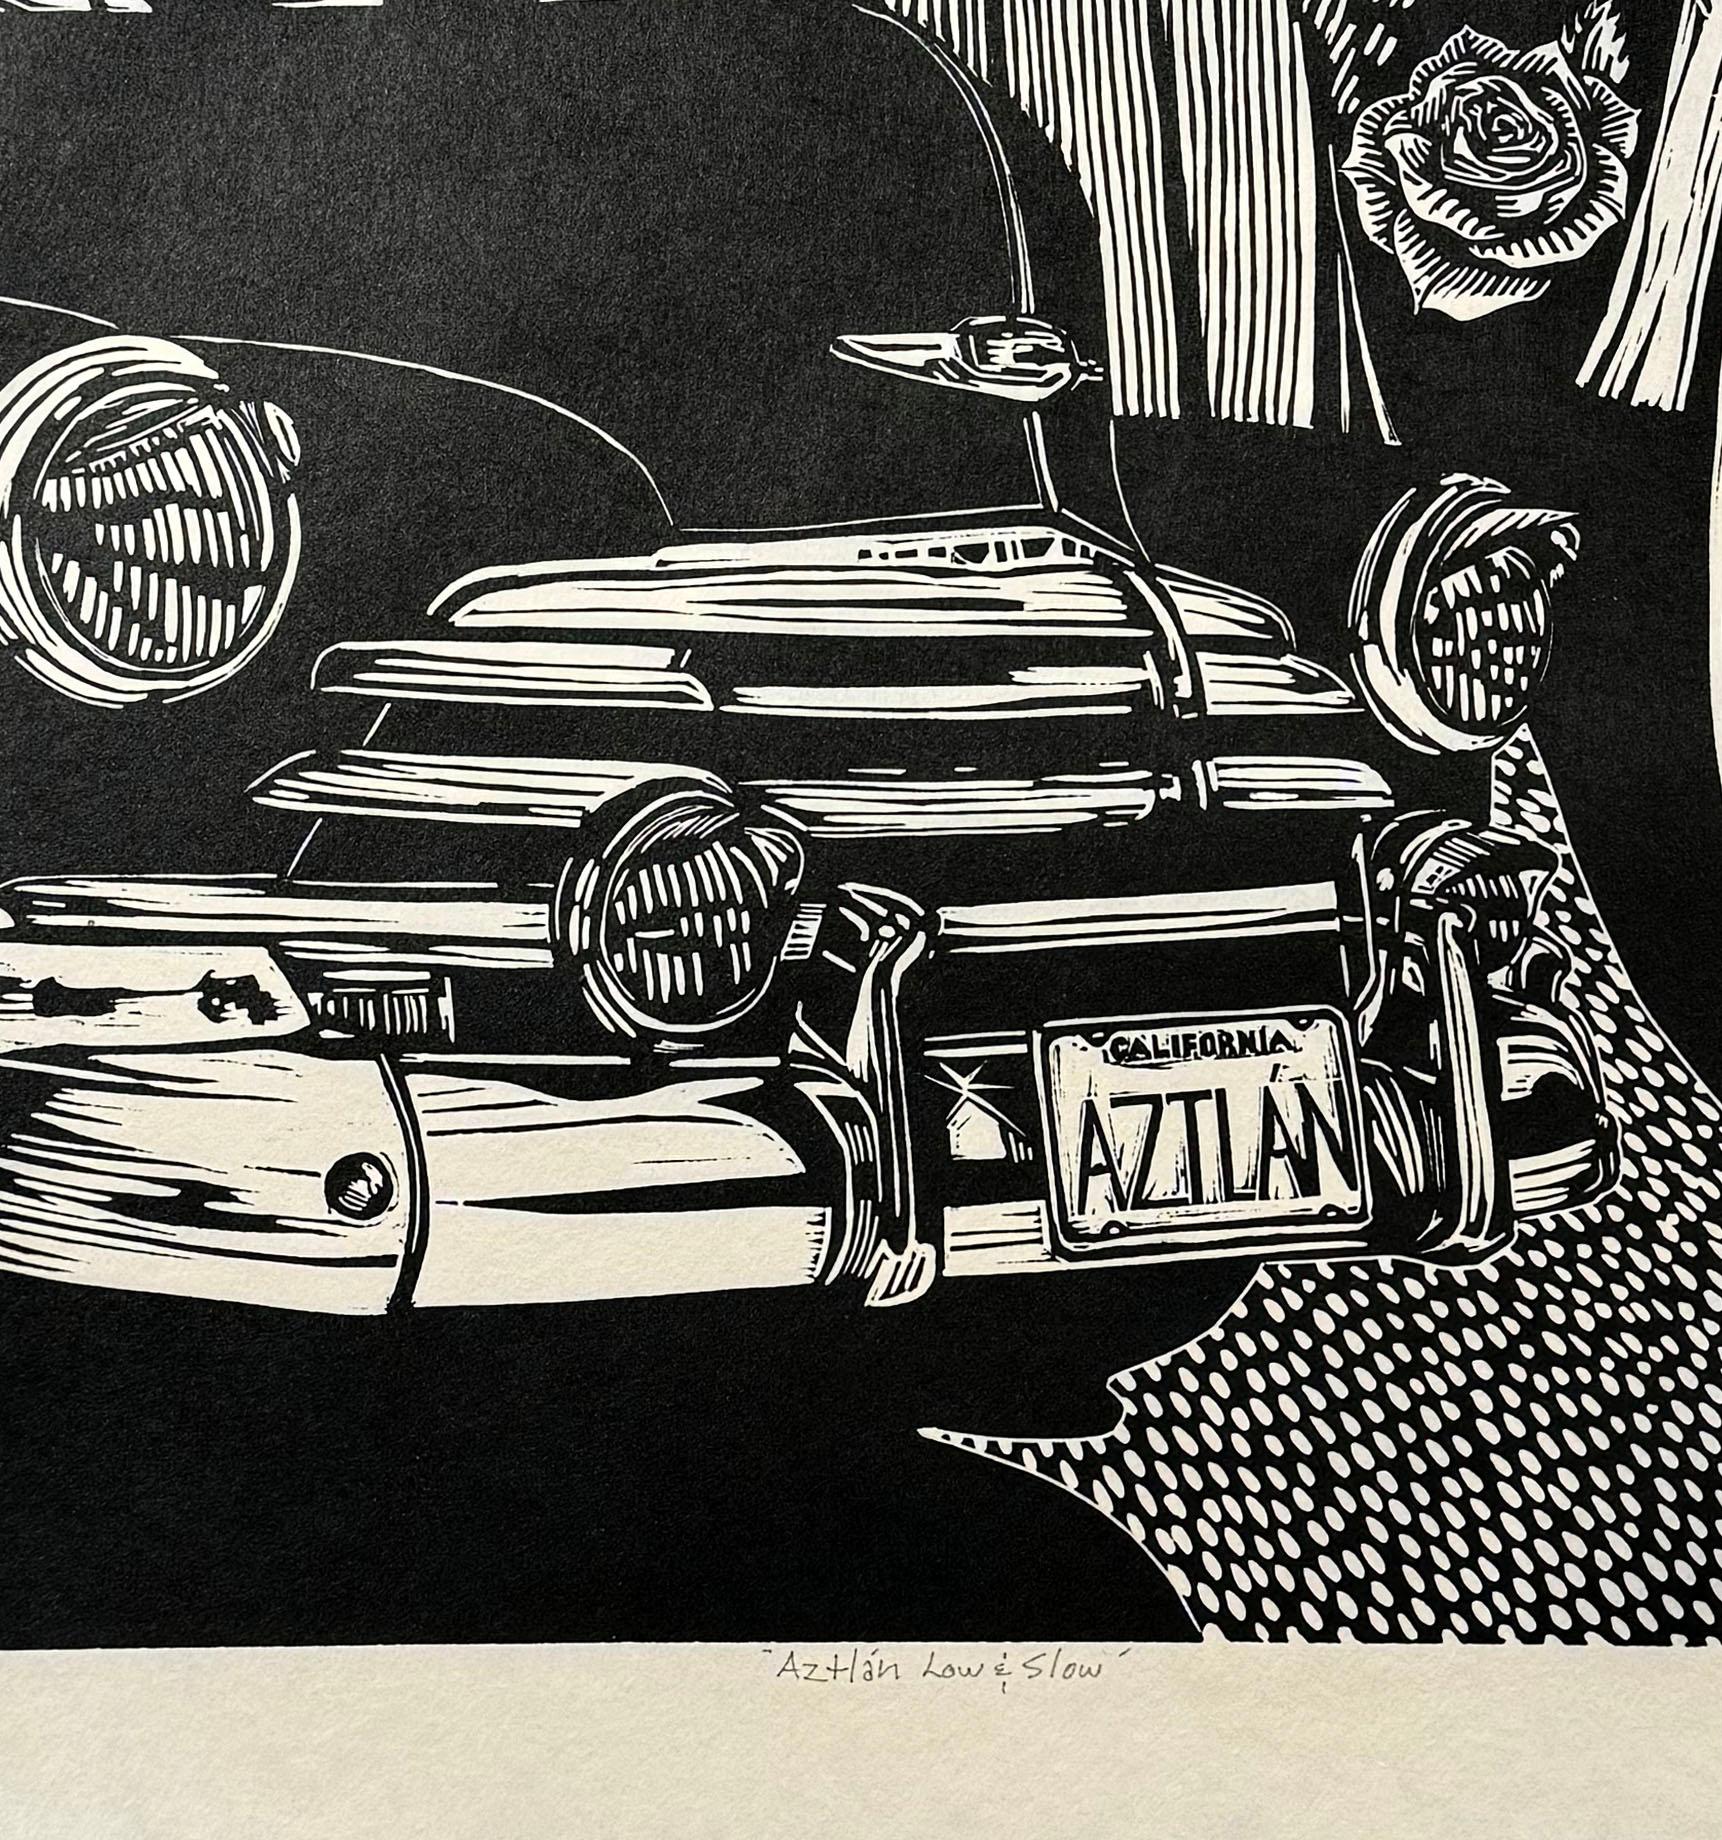 Medium: linocut
Year: 2023
Image Size: 24 x 24 inches
Edition Size: 10

An hommage to the low riders of Southern California  chicano car culture, complete with zoot suits, made famous in the Zoot Suit Riots of 1943.

As a cultural